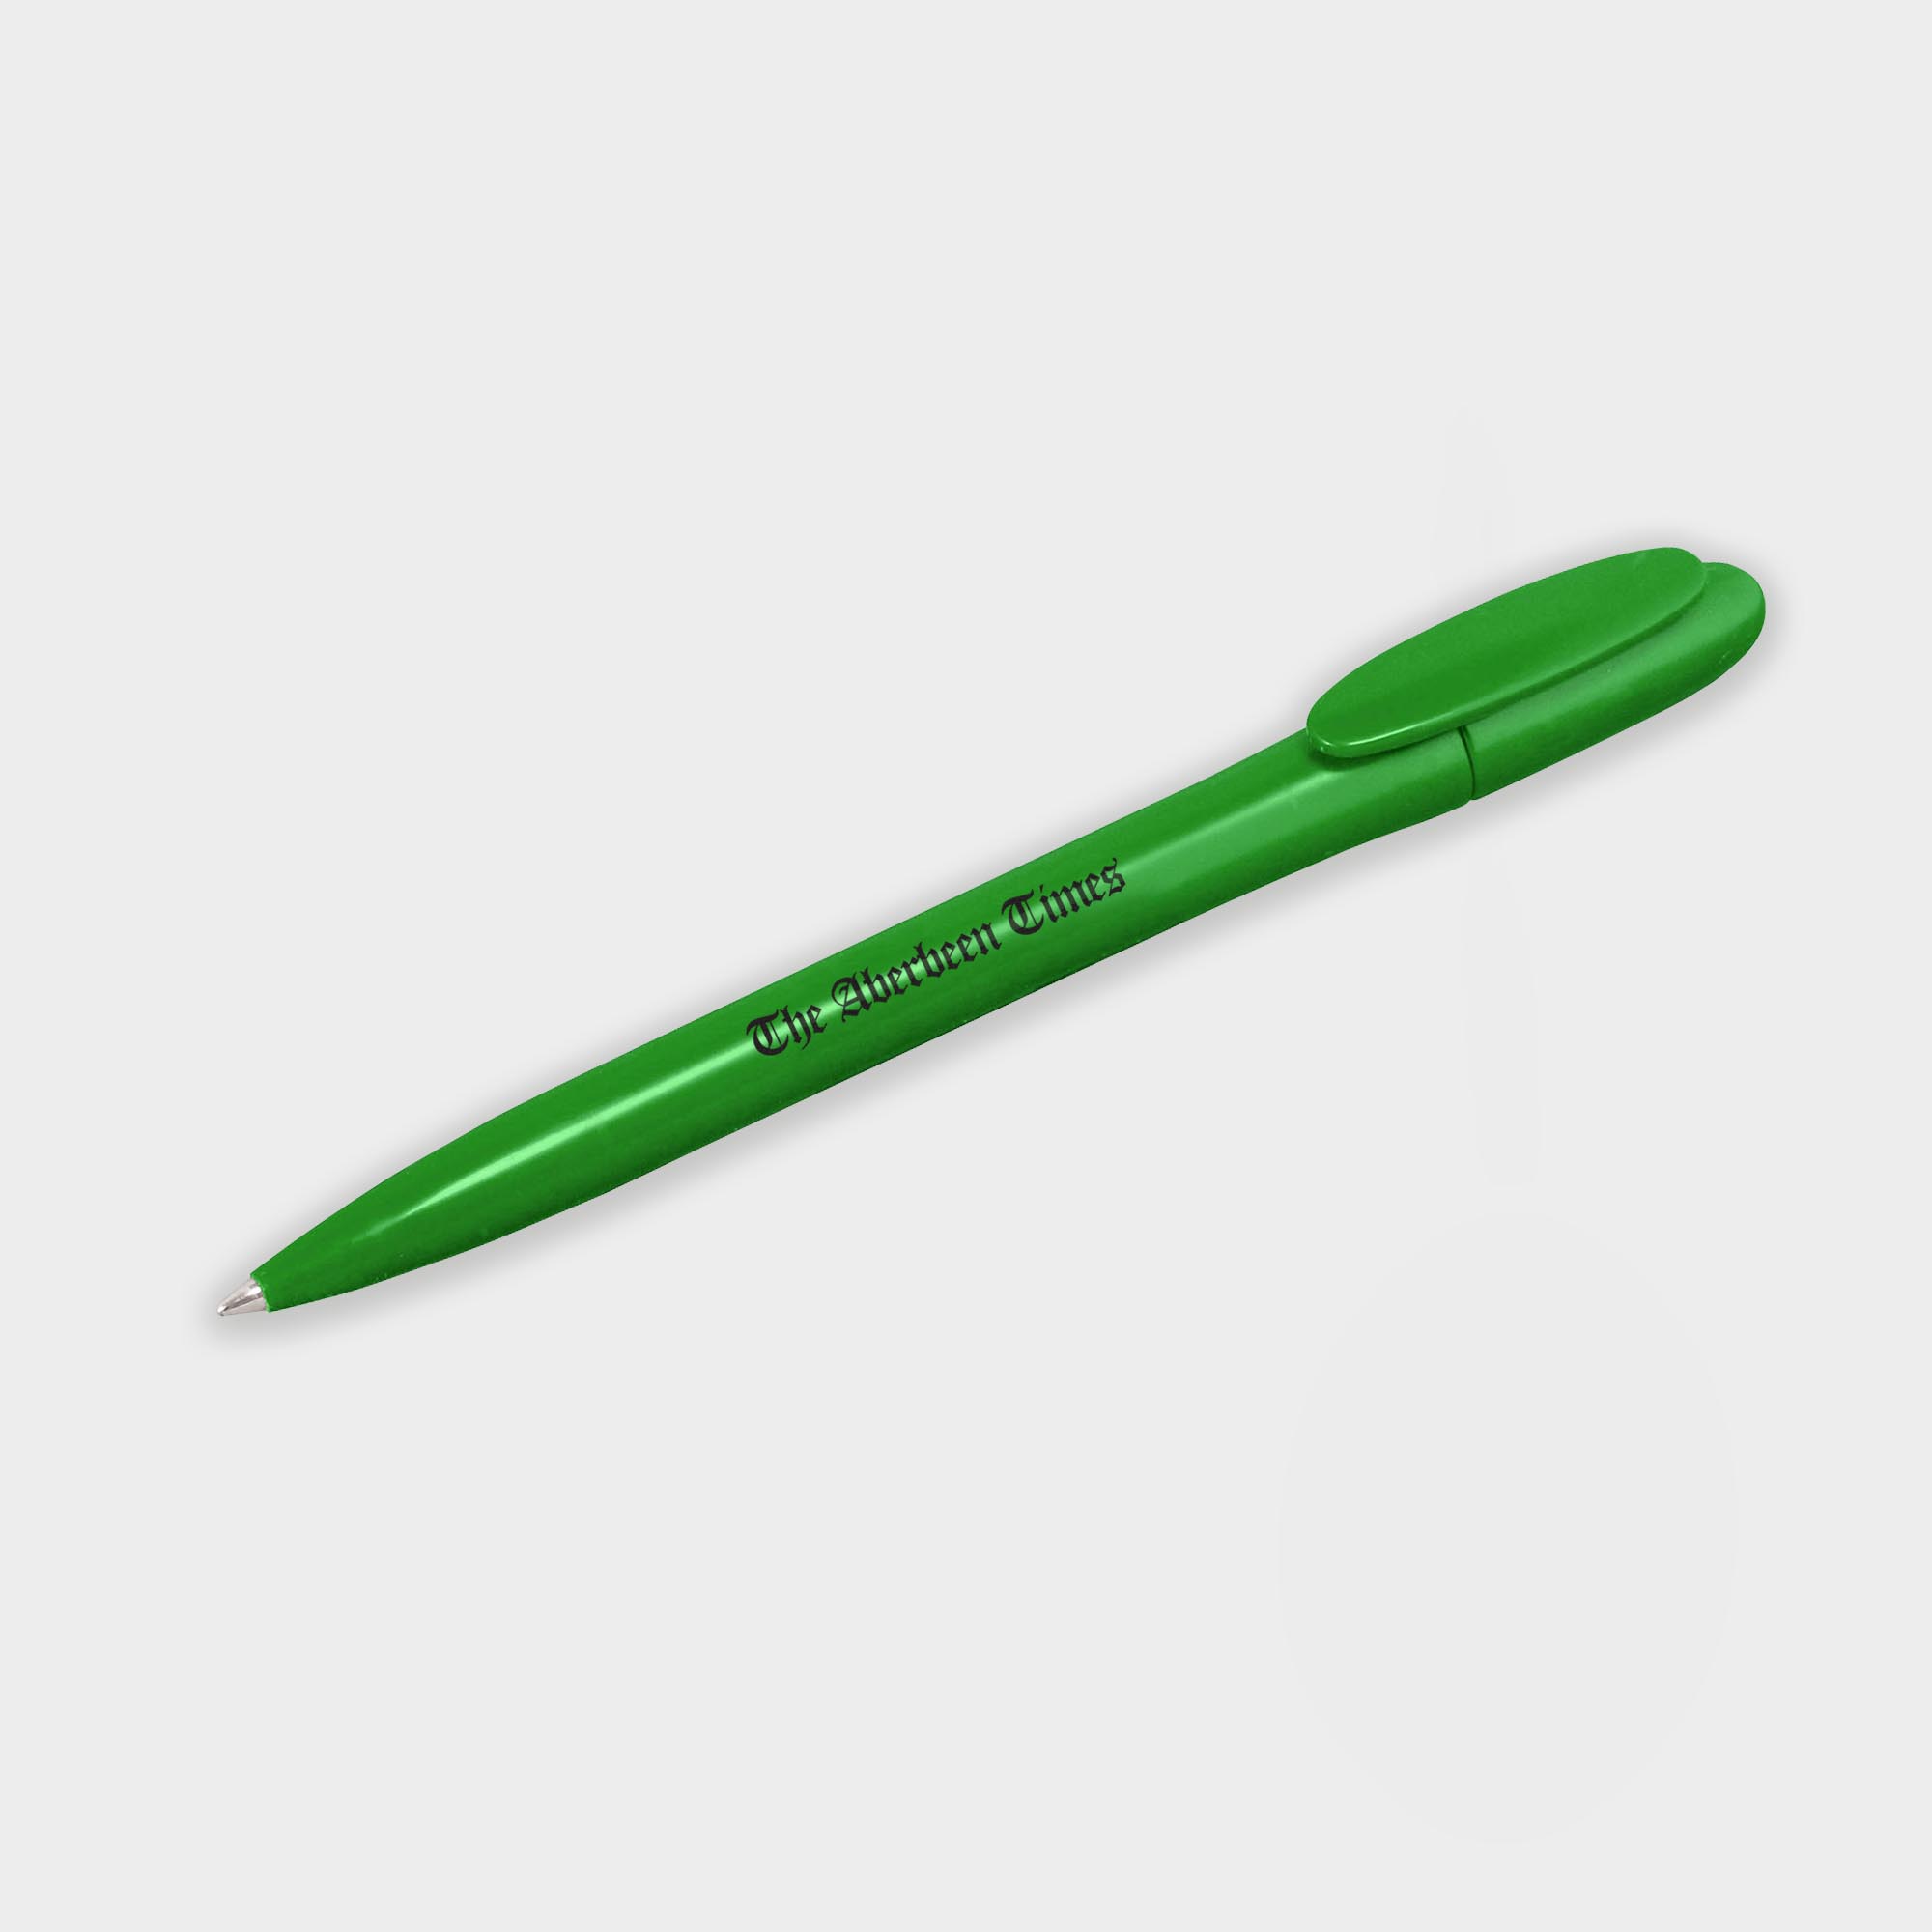 The Green & Good Realta ballpen. It is made in the EU from recycled plastic. Available in a variety of colours with a twist action mechanism. Comes with black ink as standard. One of our bestsellers. Green